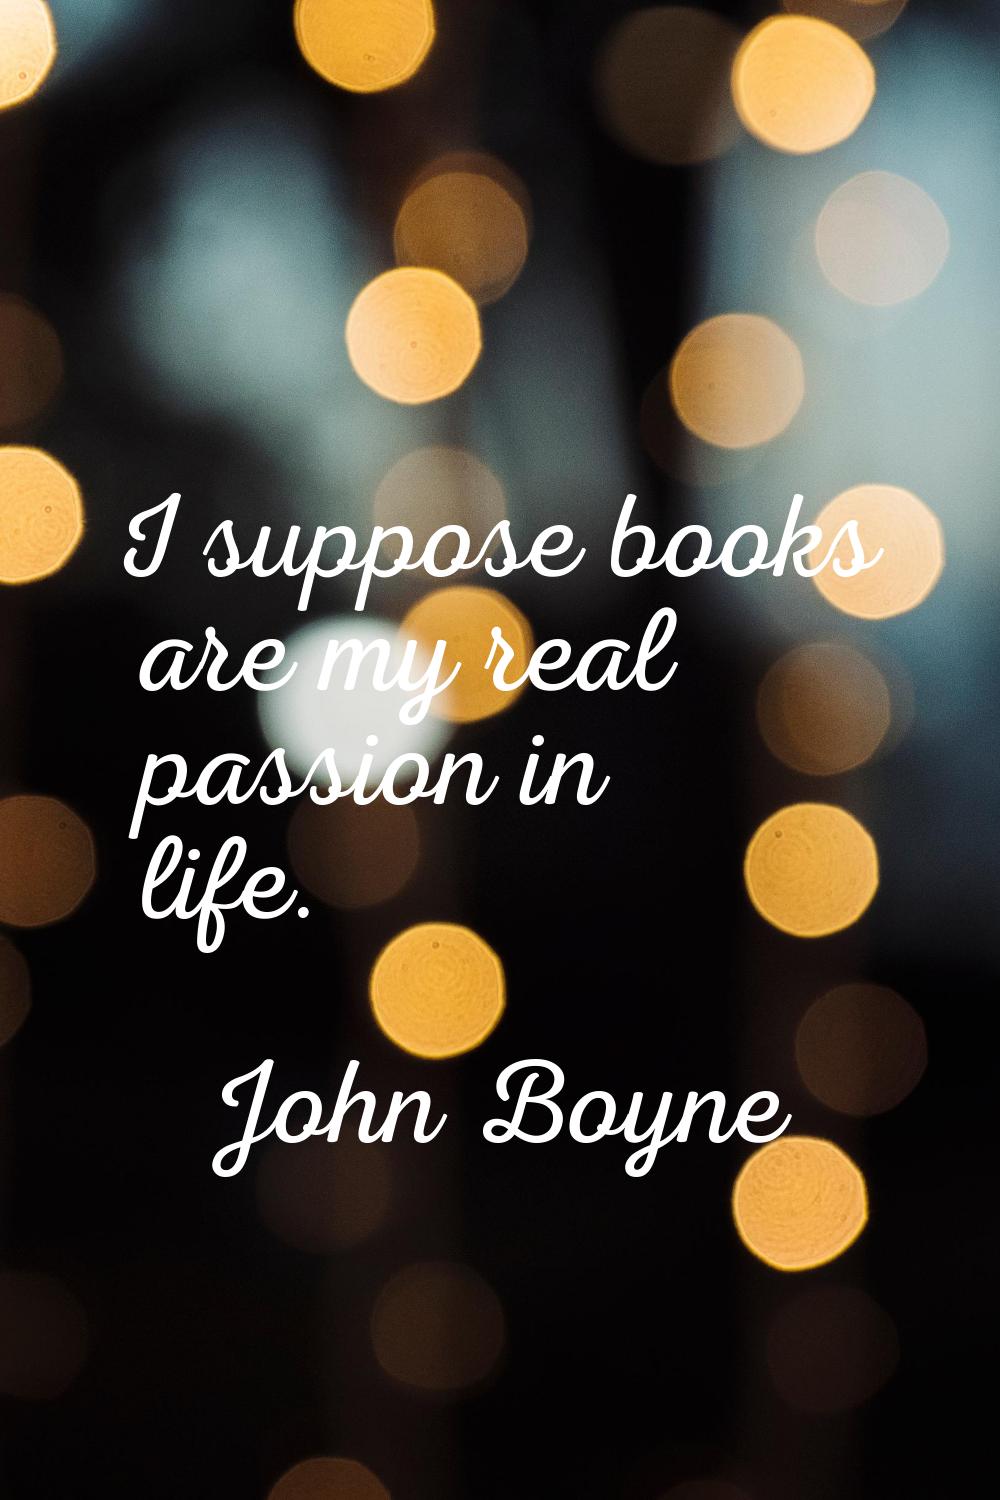 I suppose books are my real passion in life.